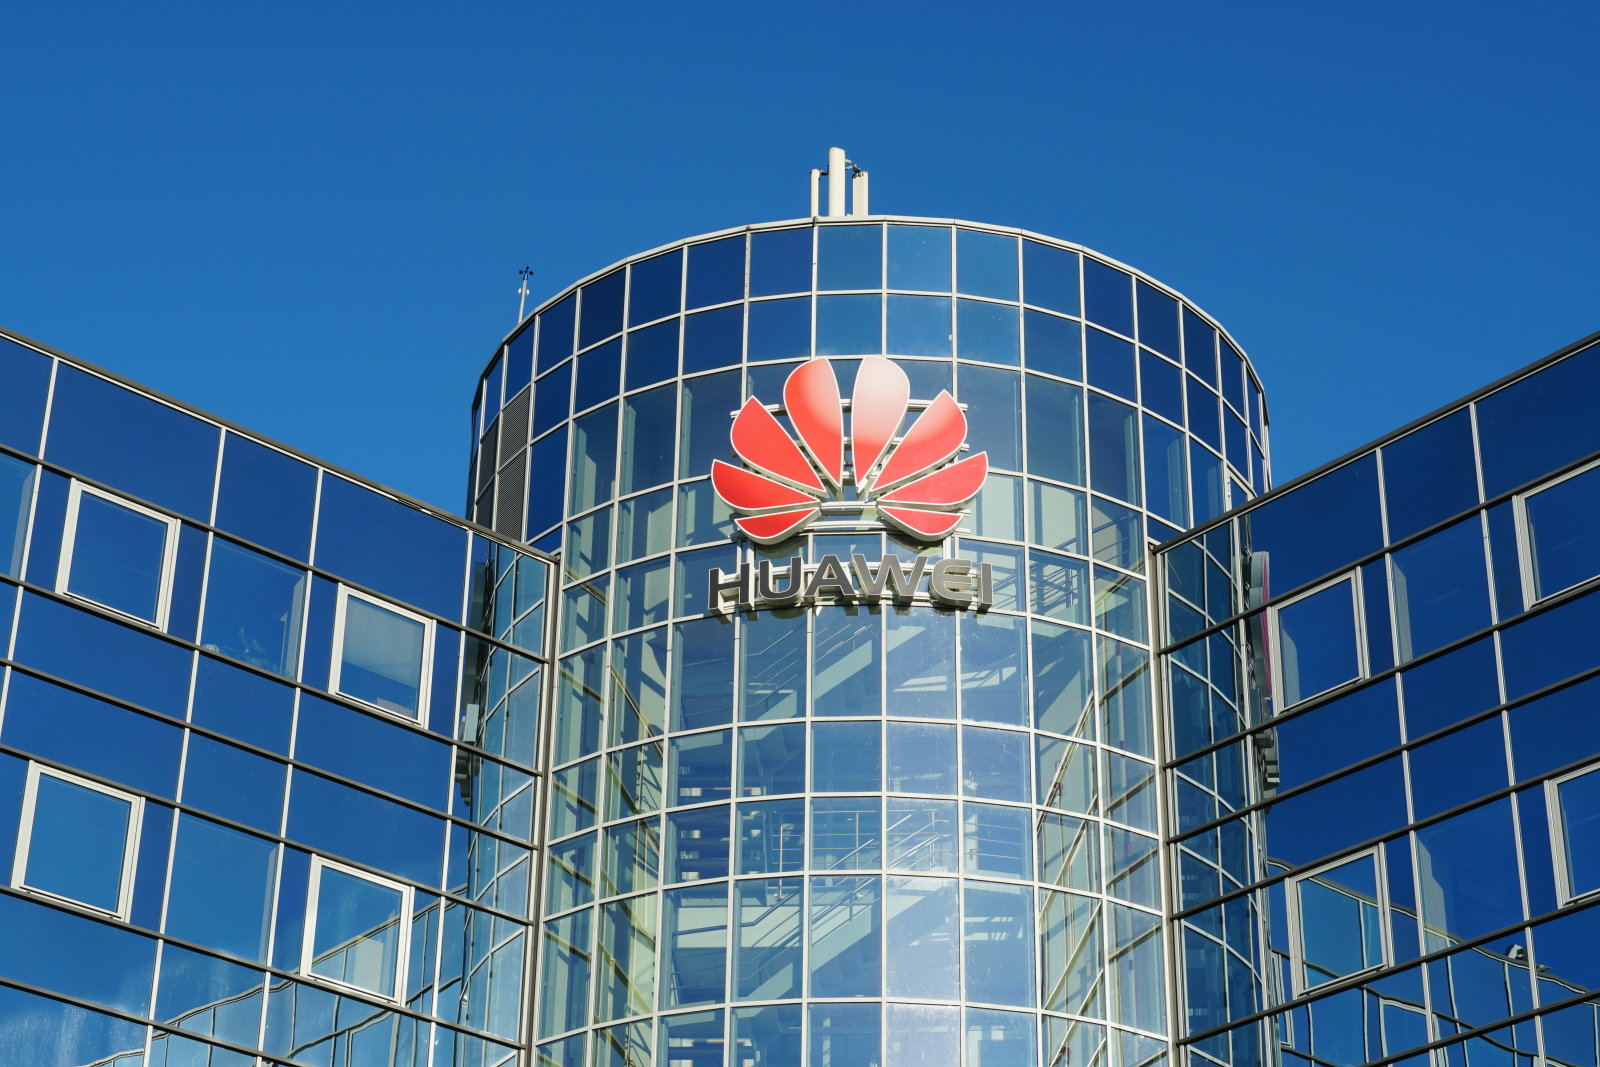 Senate approves $1 billion budget to help rural carriers replace Huawei gear